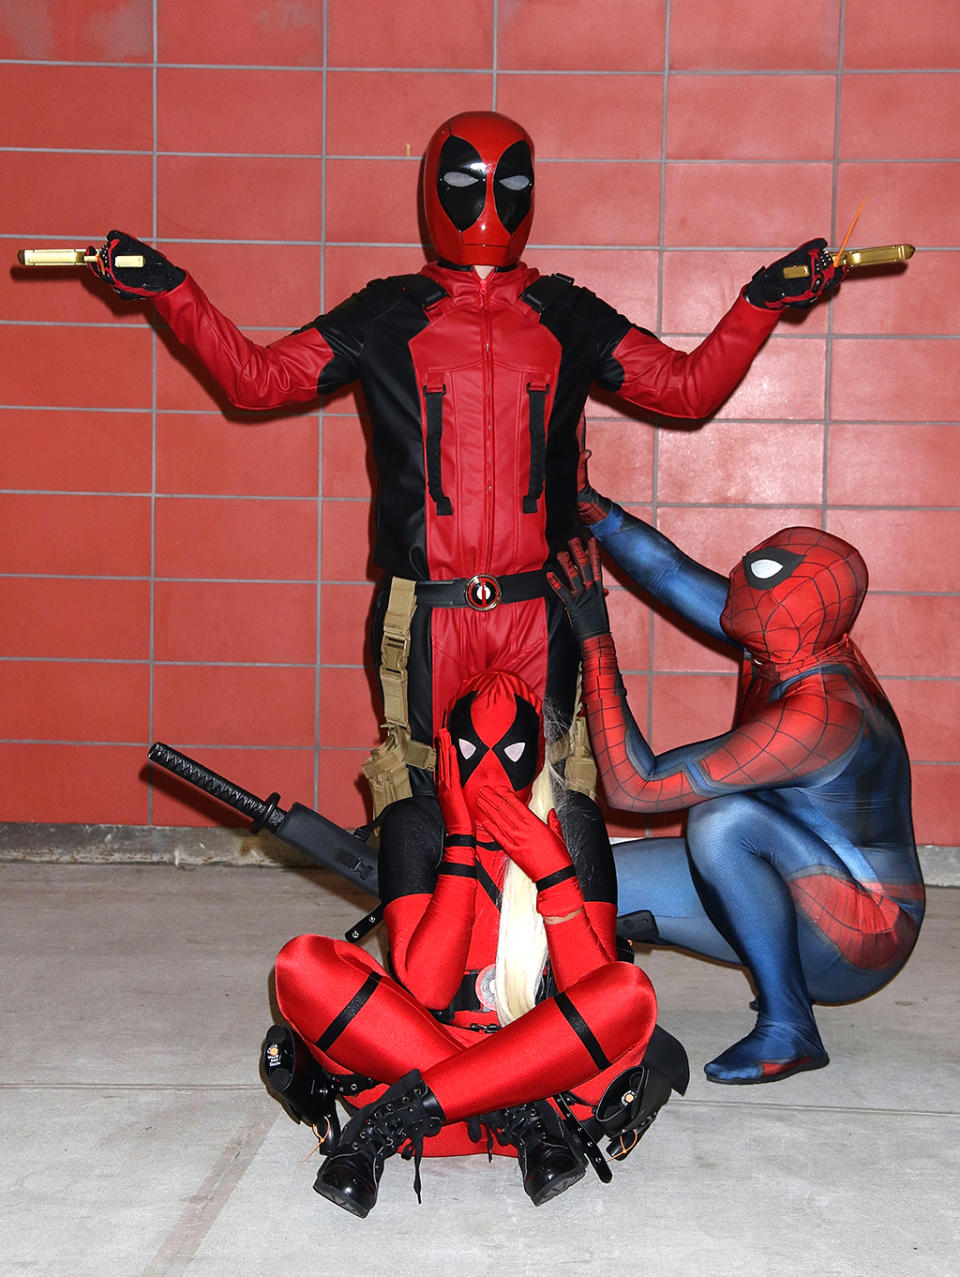 Deadpools and Spider-Man